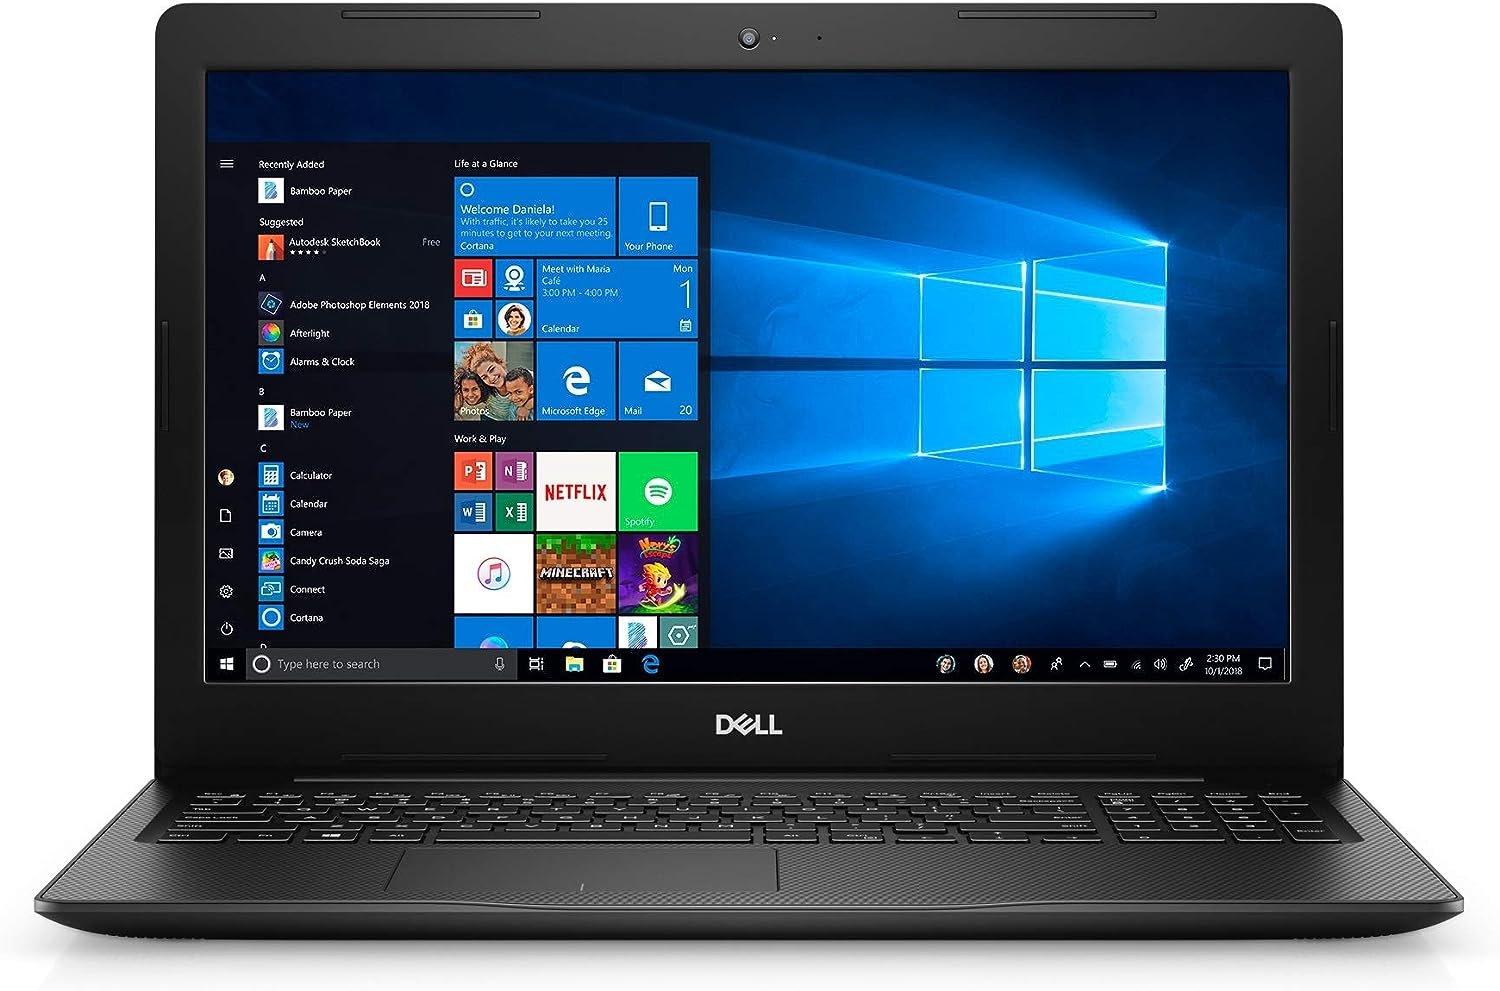 Dell Inspiron 3000 Series 15.6" HD Notebook